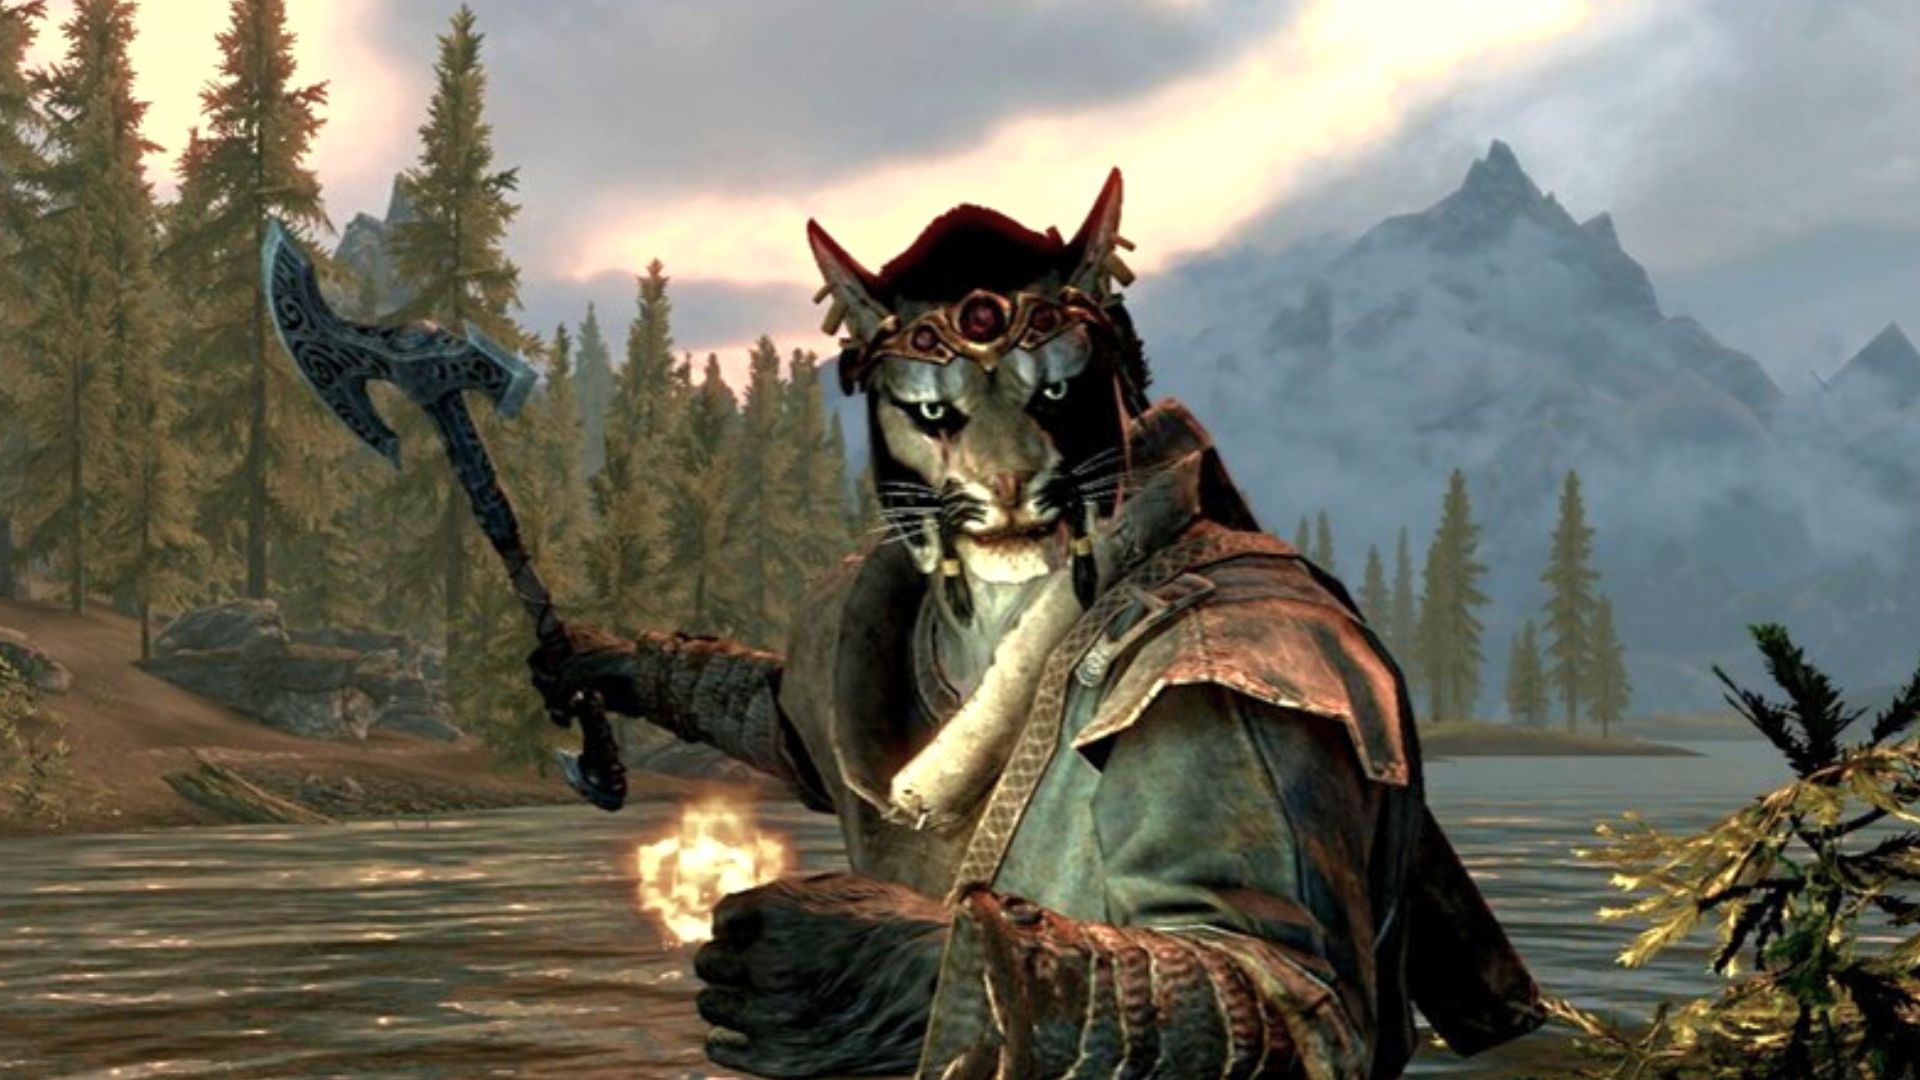 Skyrim Now Boasts Essential Element for First-Person Games: Feet